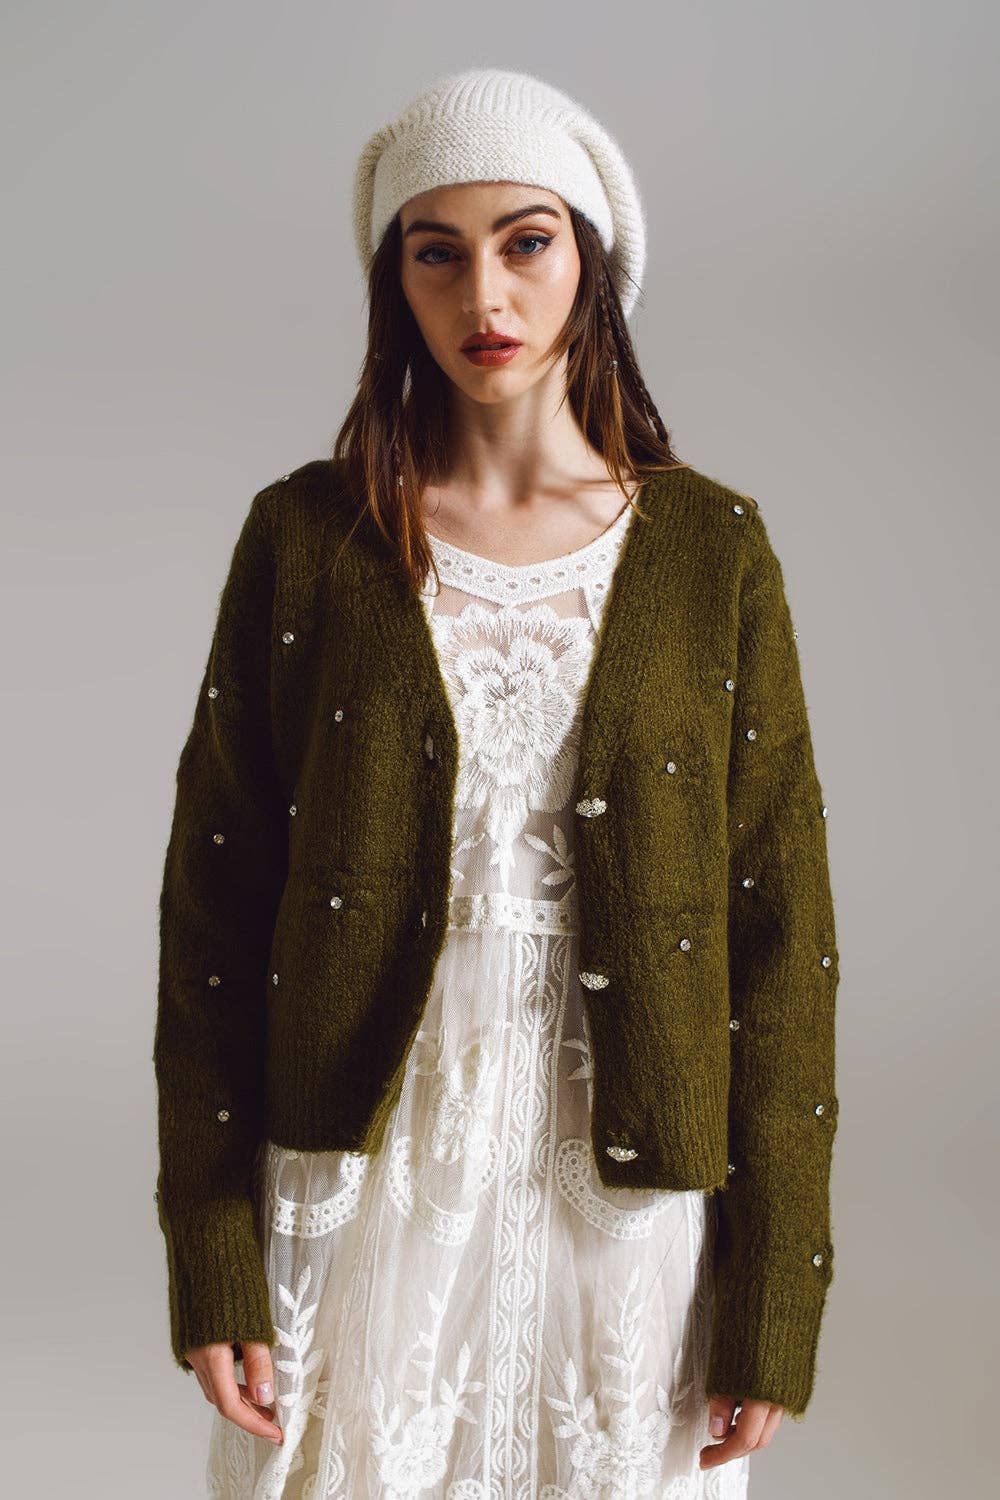 Brown cardigan with knitted flowers and embellished details - Something about Sofia